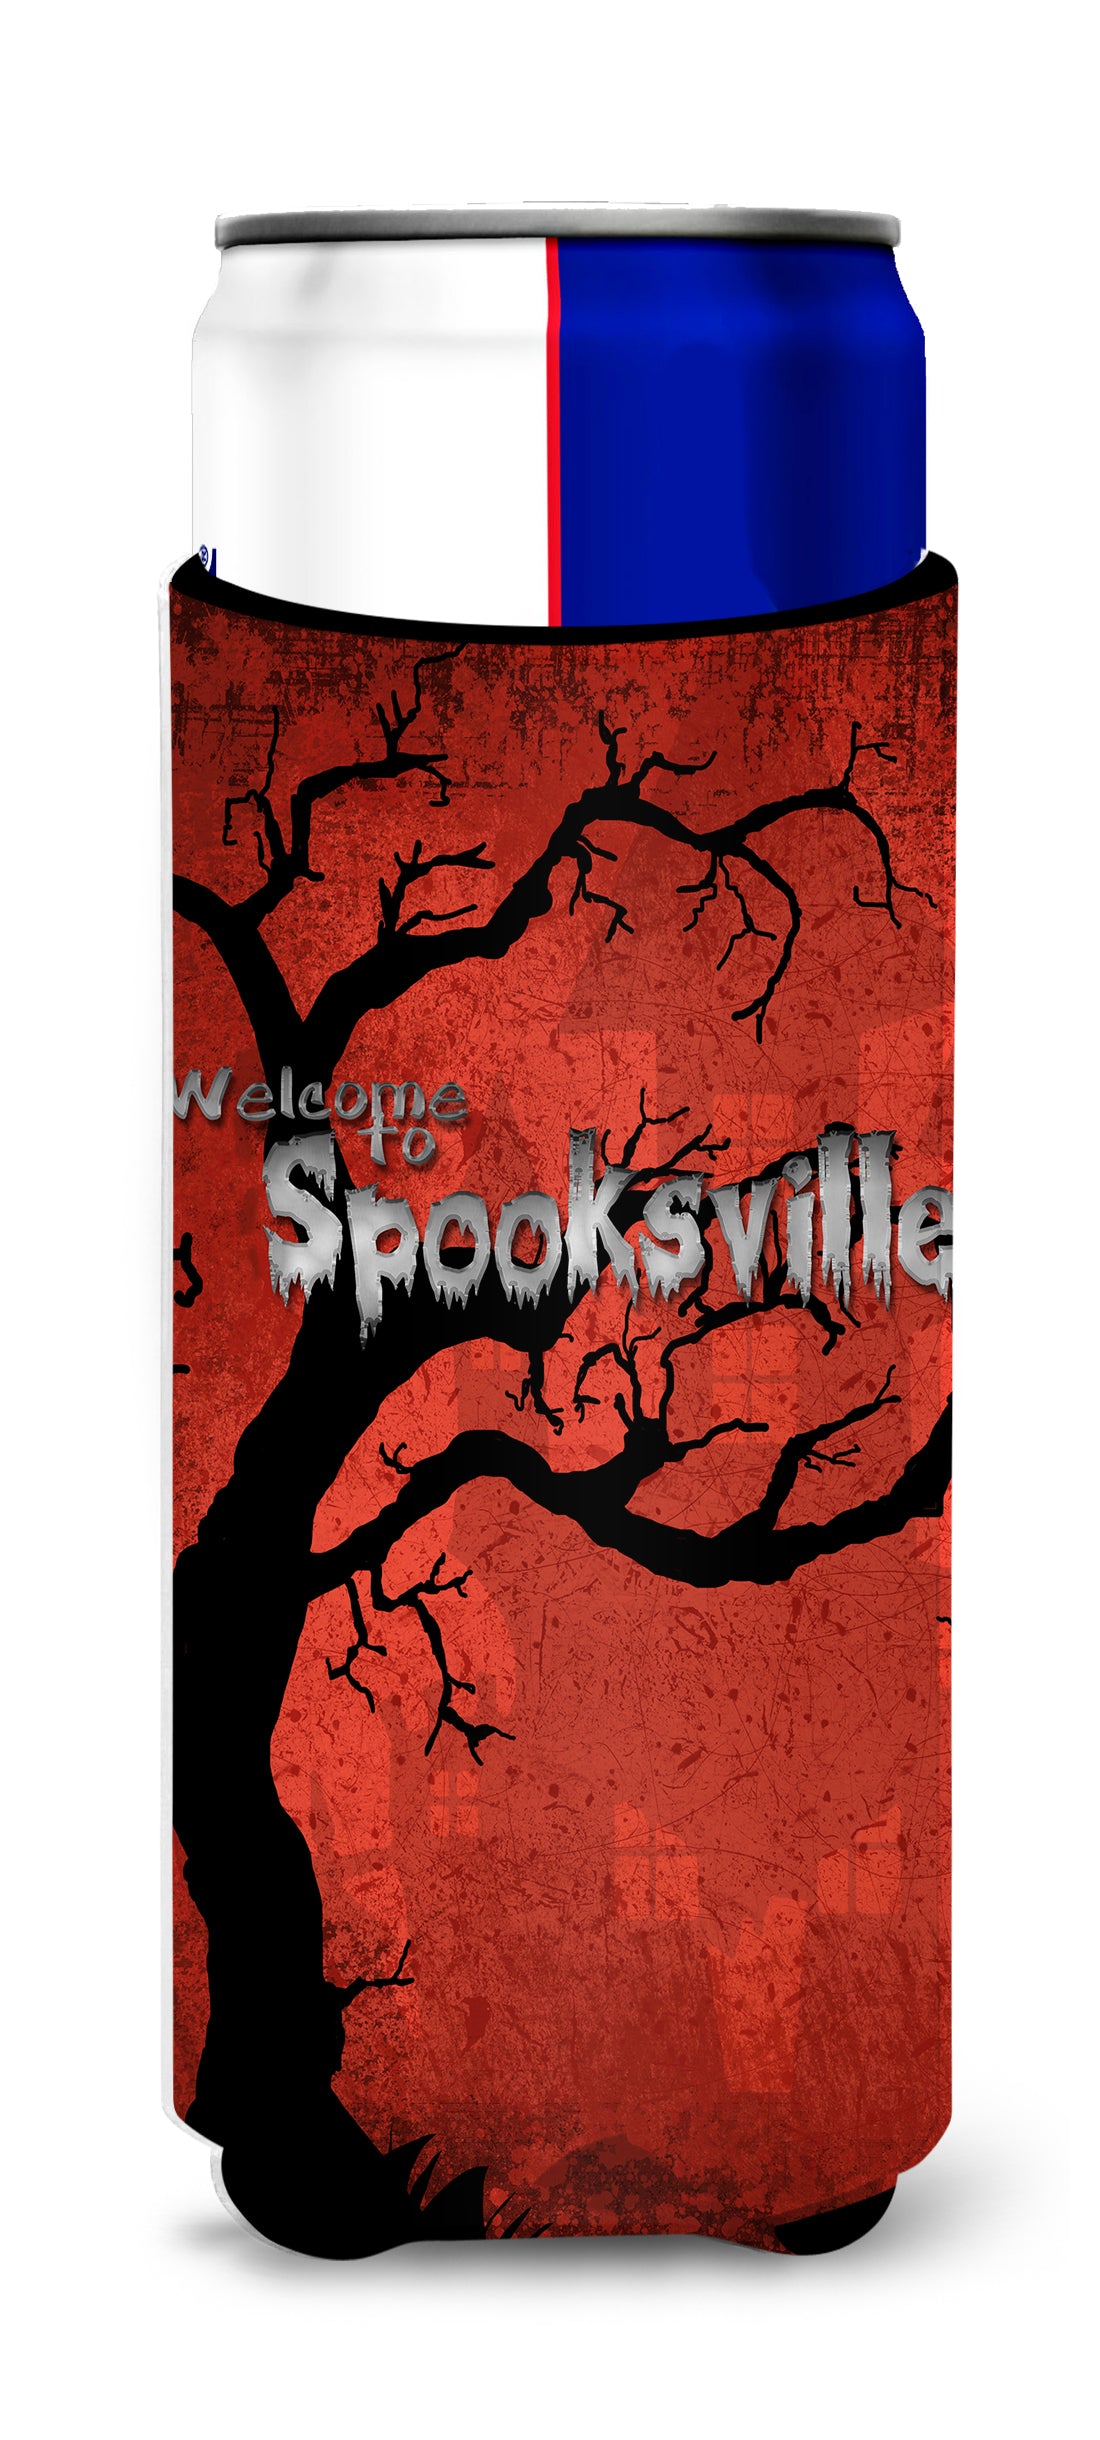 Welcome to Spooksville Halloween Ultra Beverage Insulators for slim cans SB3008MUK